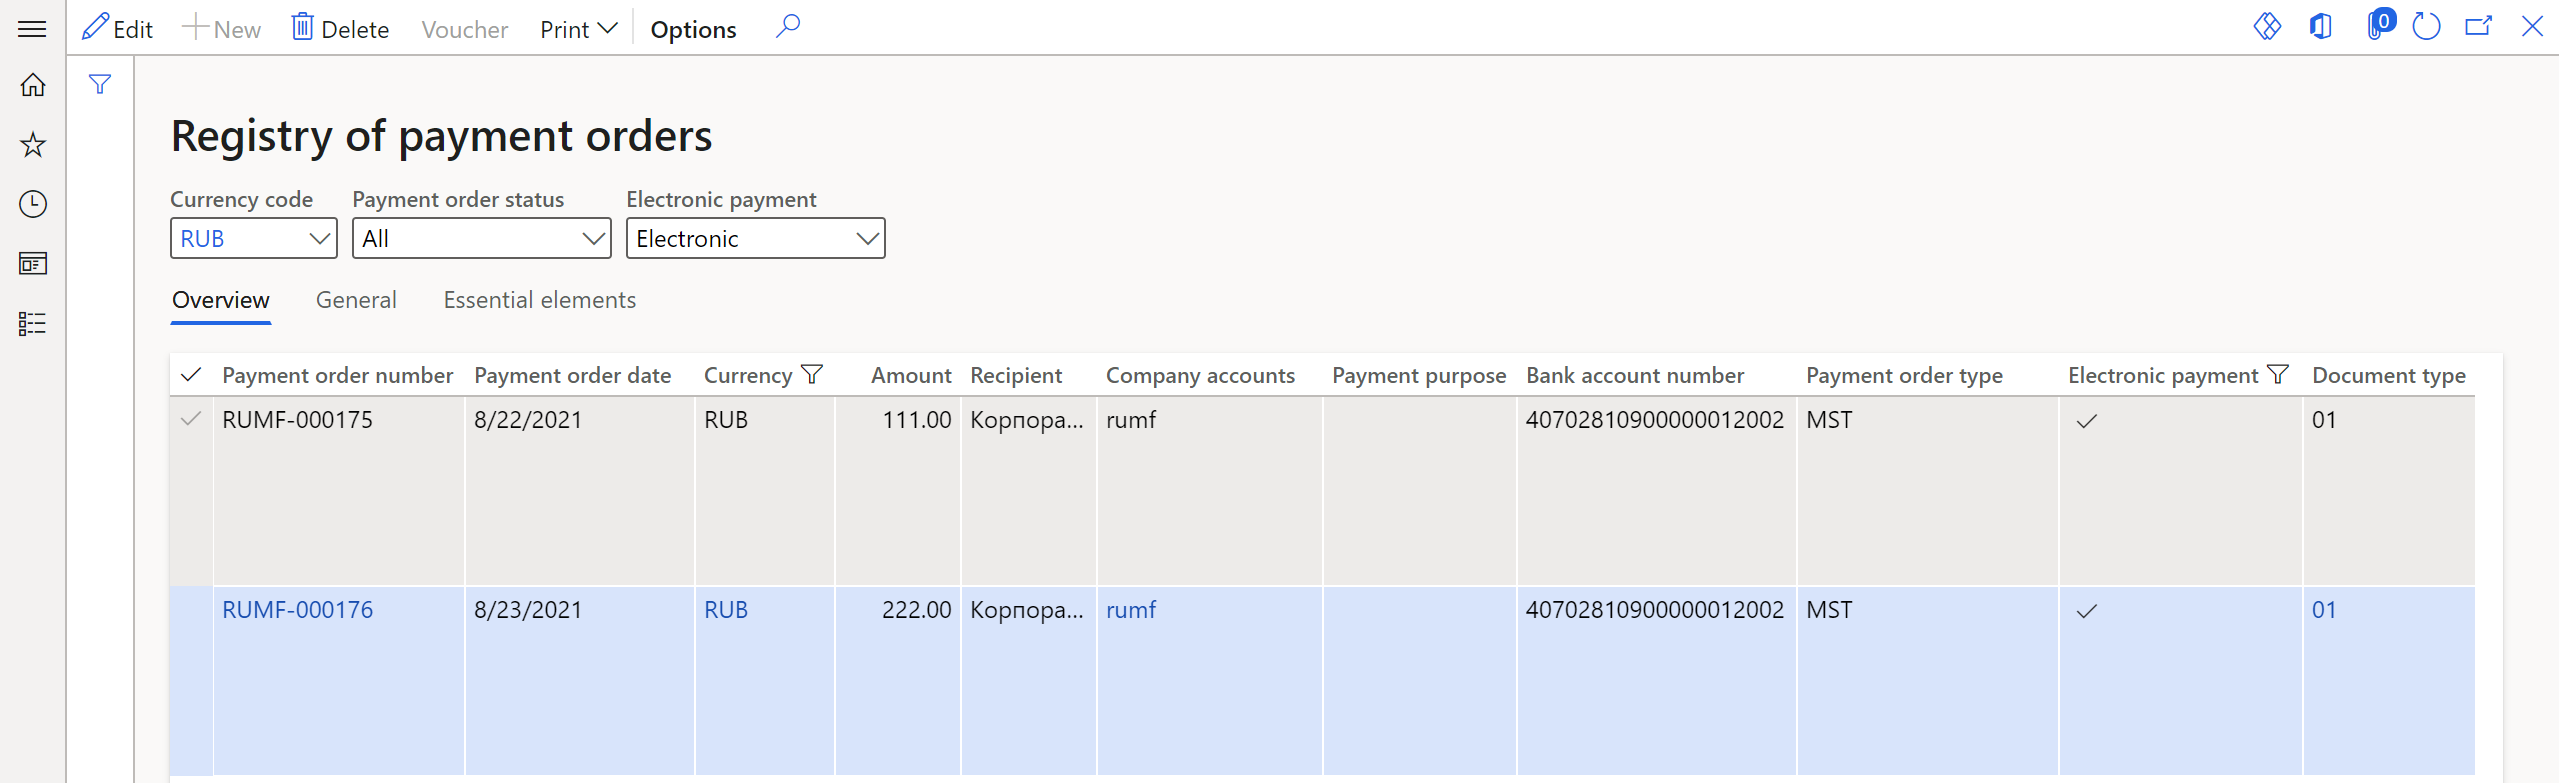 Payment documents on the Overview tab of the Registry of payment orders page.